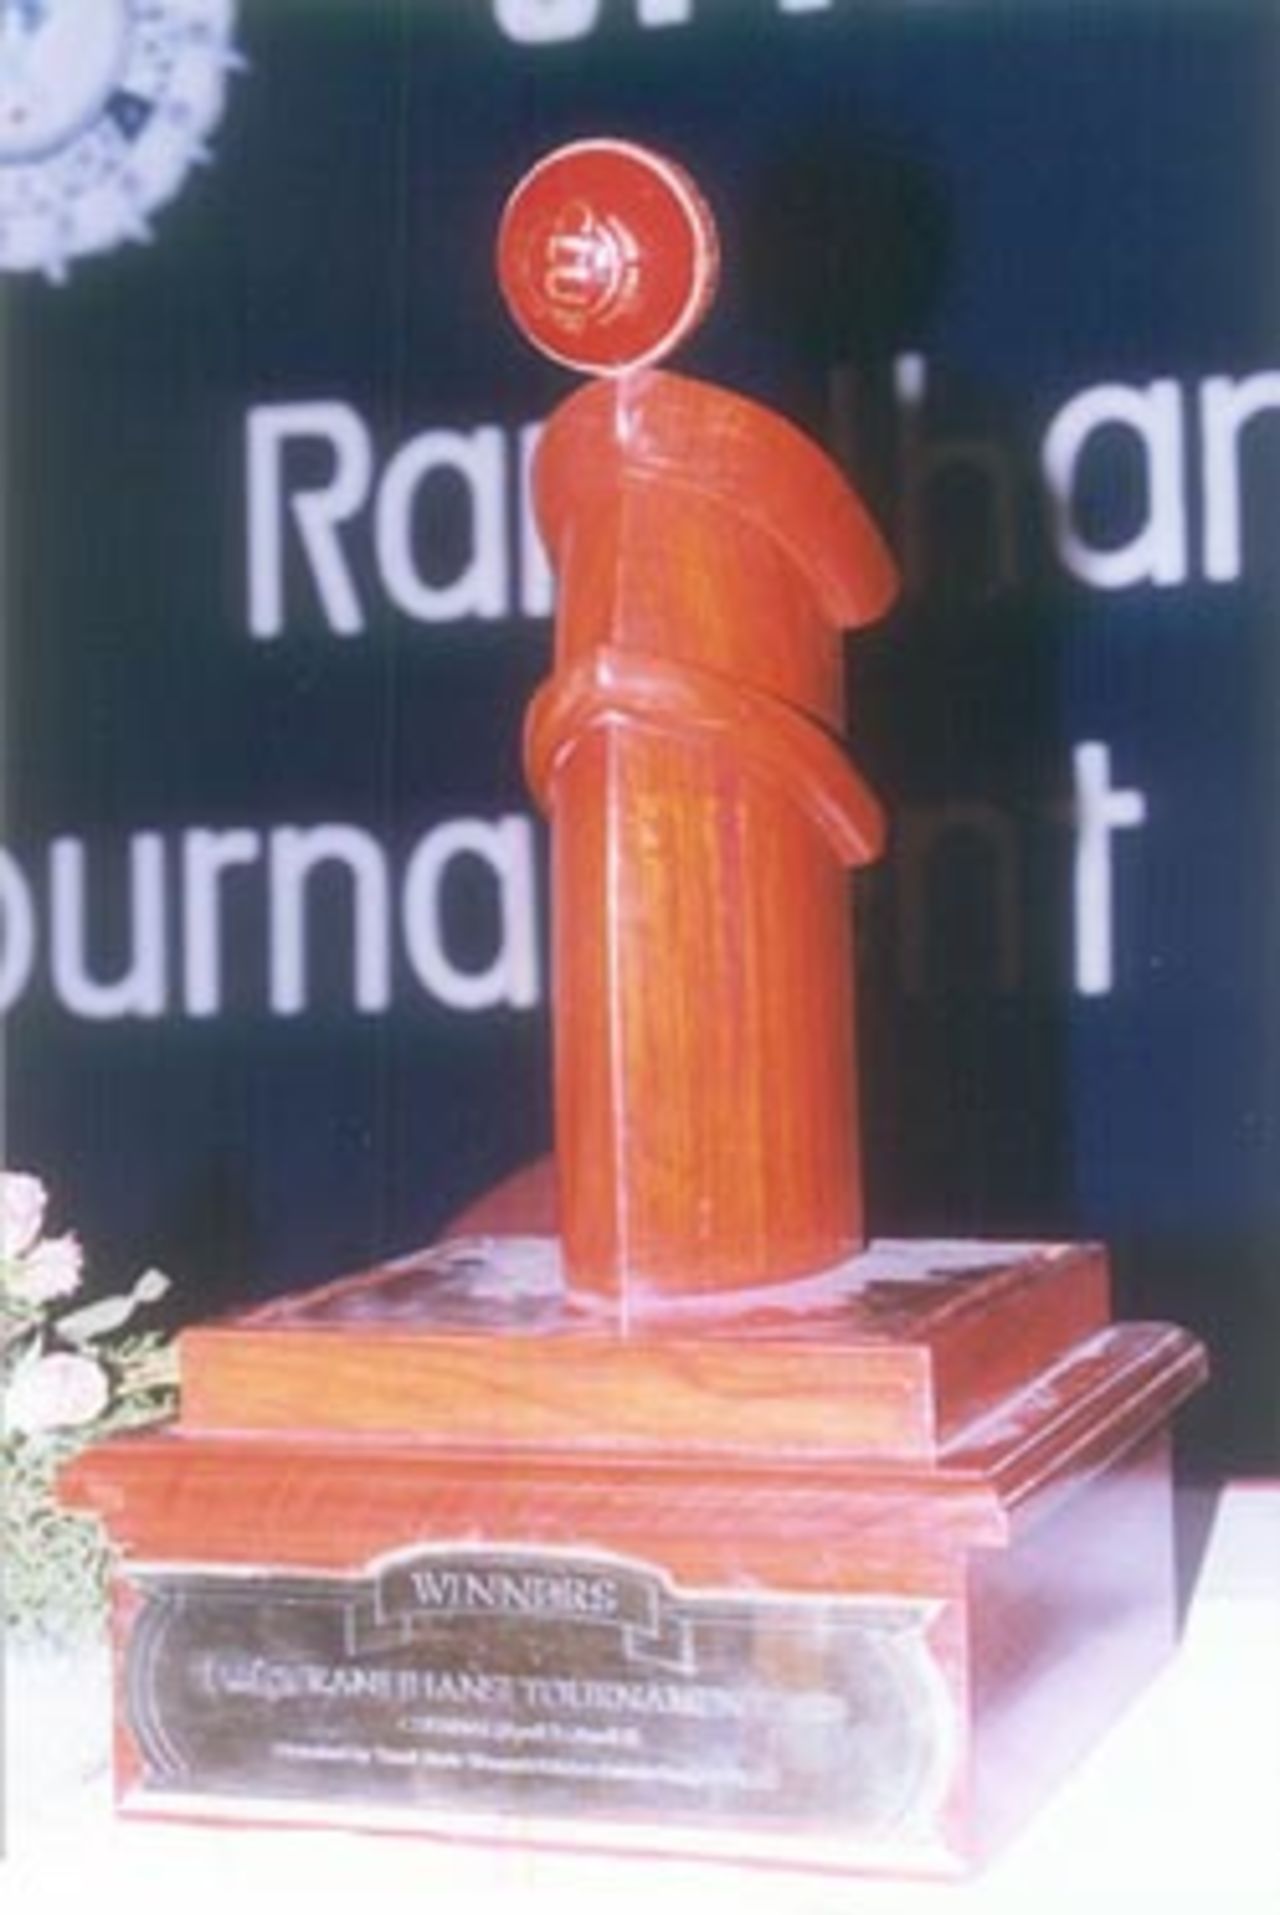 The CricInfo Rani Jhansi Trophy displayed at the press conference, Connemara Hotel Chennai, 1st April 2000